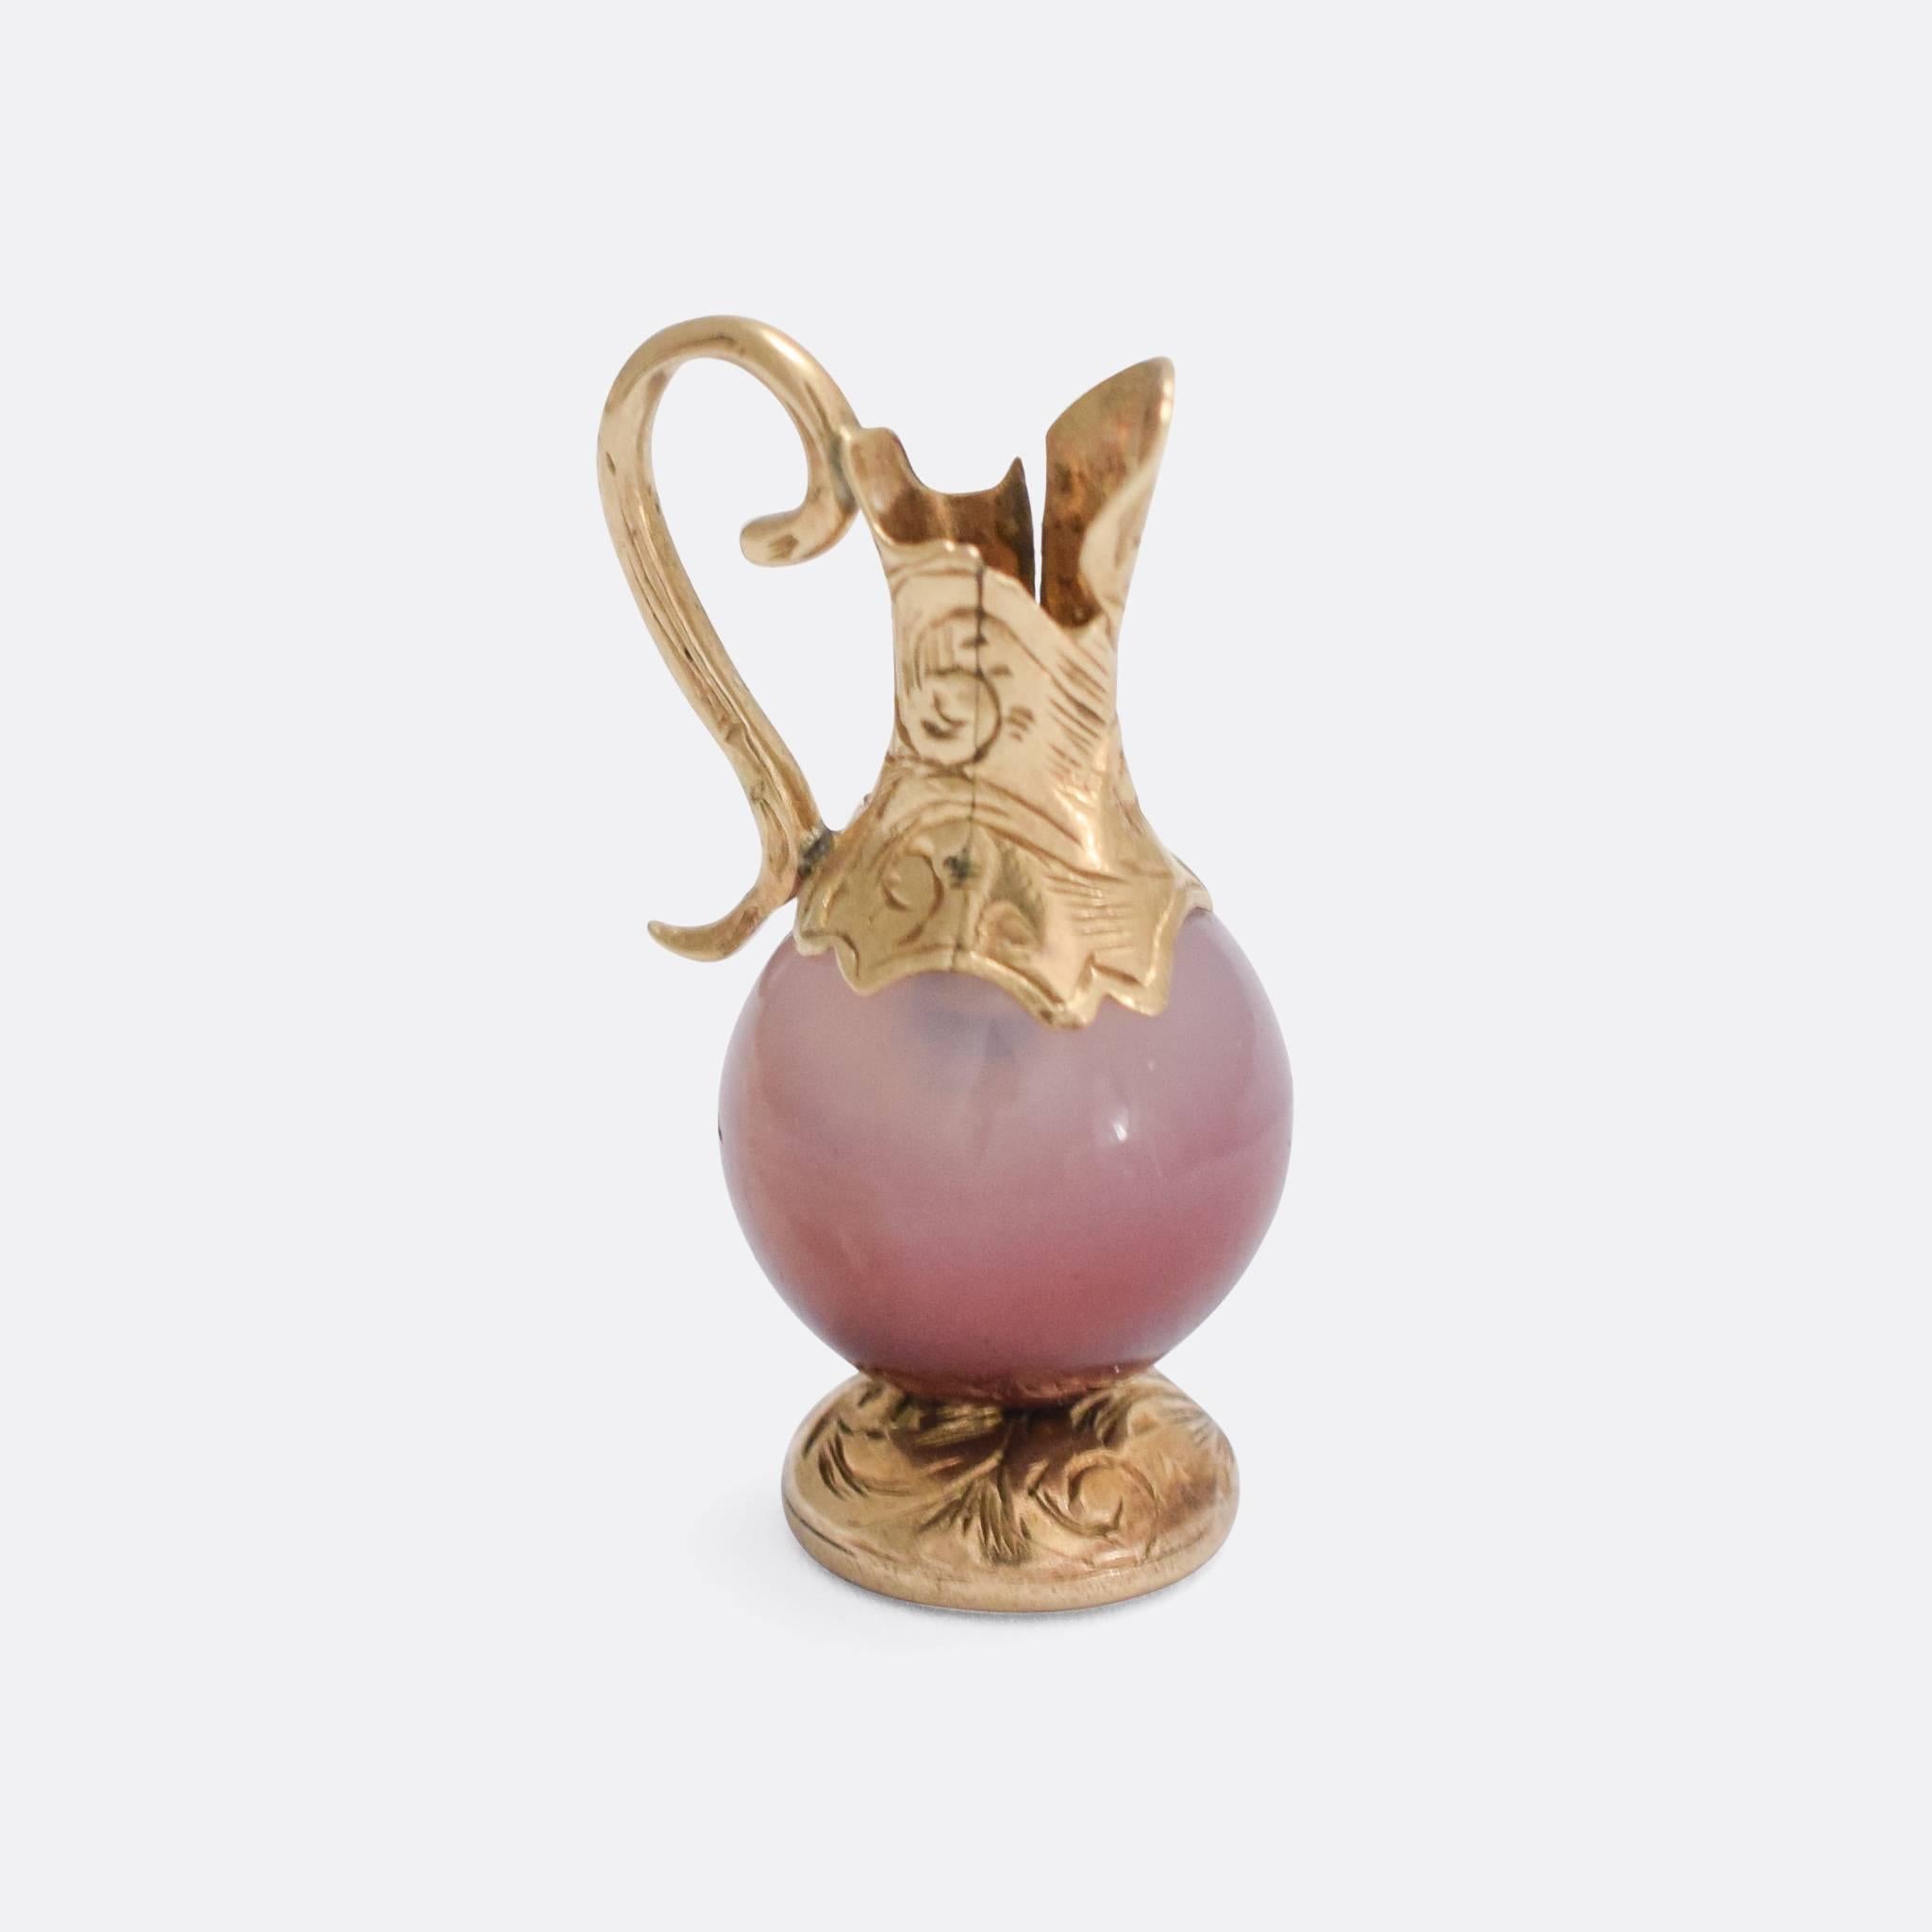 A sweet antique charm pendant dating to the early 19th Century. It has been modelled as a pourer jug, with a polished agate body and yellow gold fittings. Lovely chased detailing to the base and the top. The piece would have originally been intended